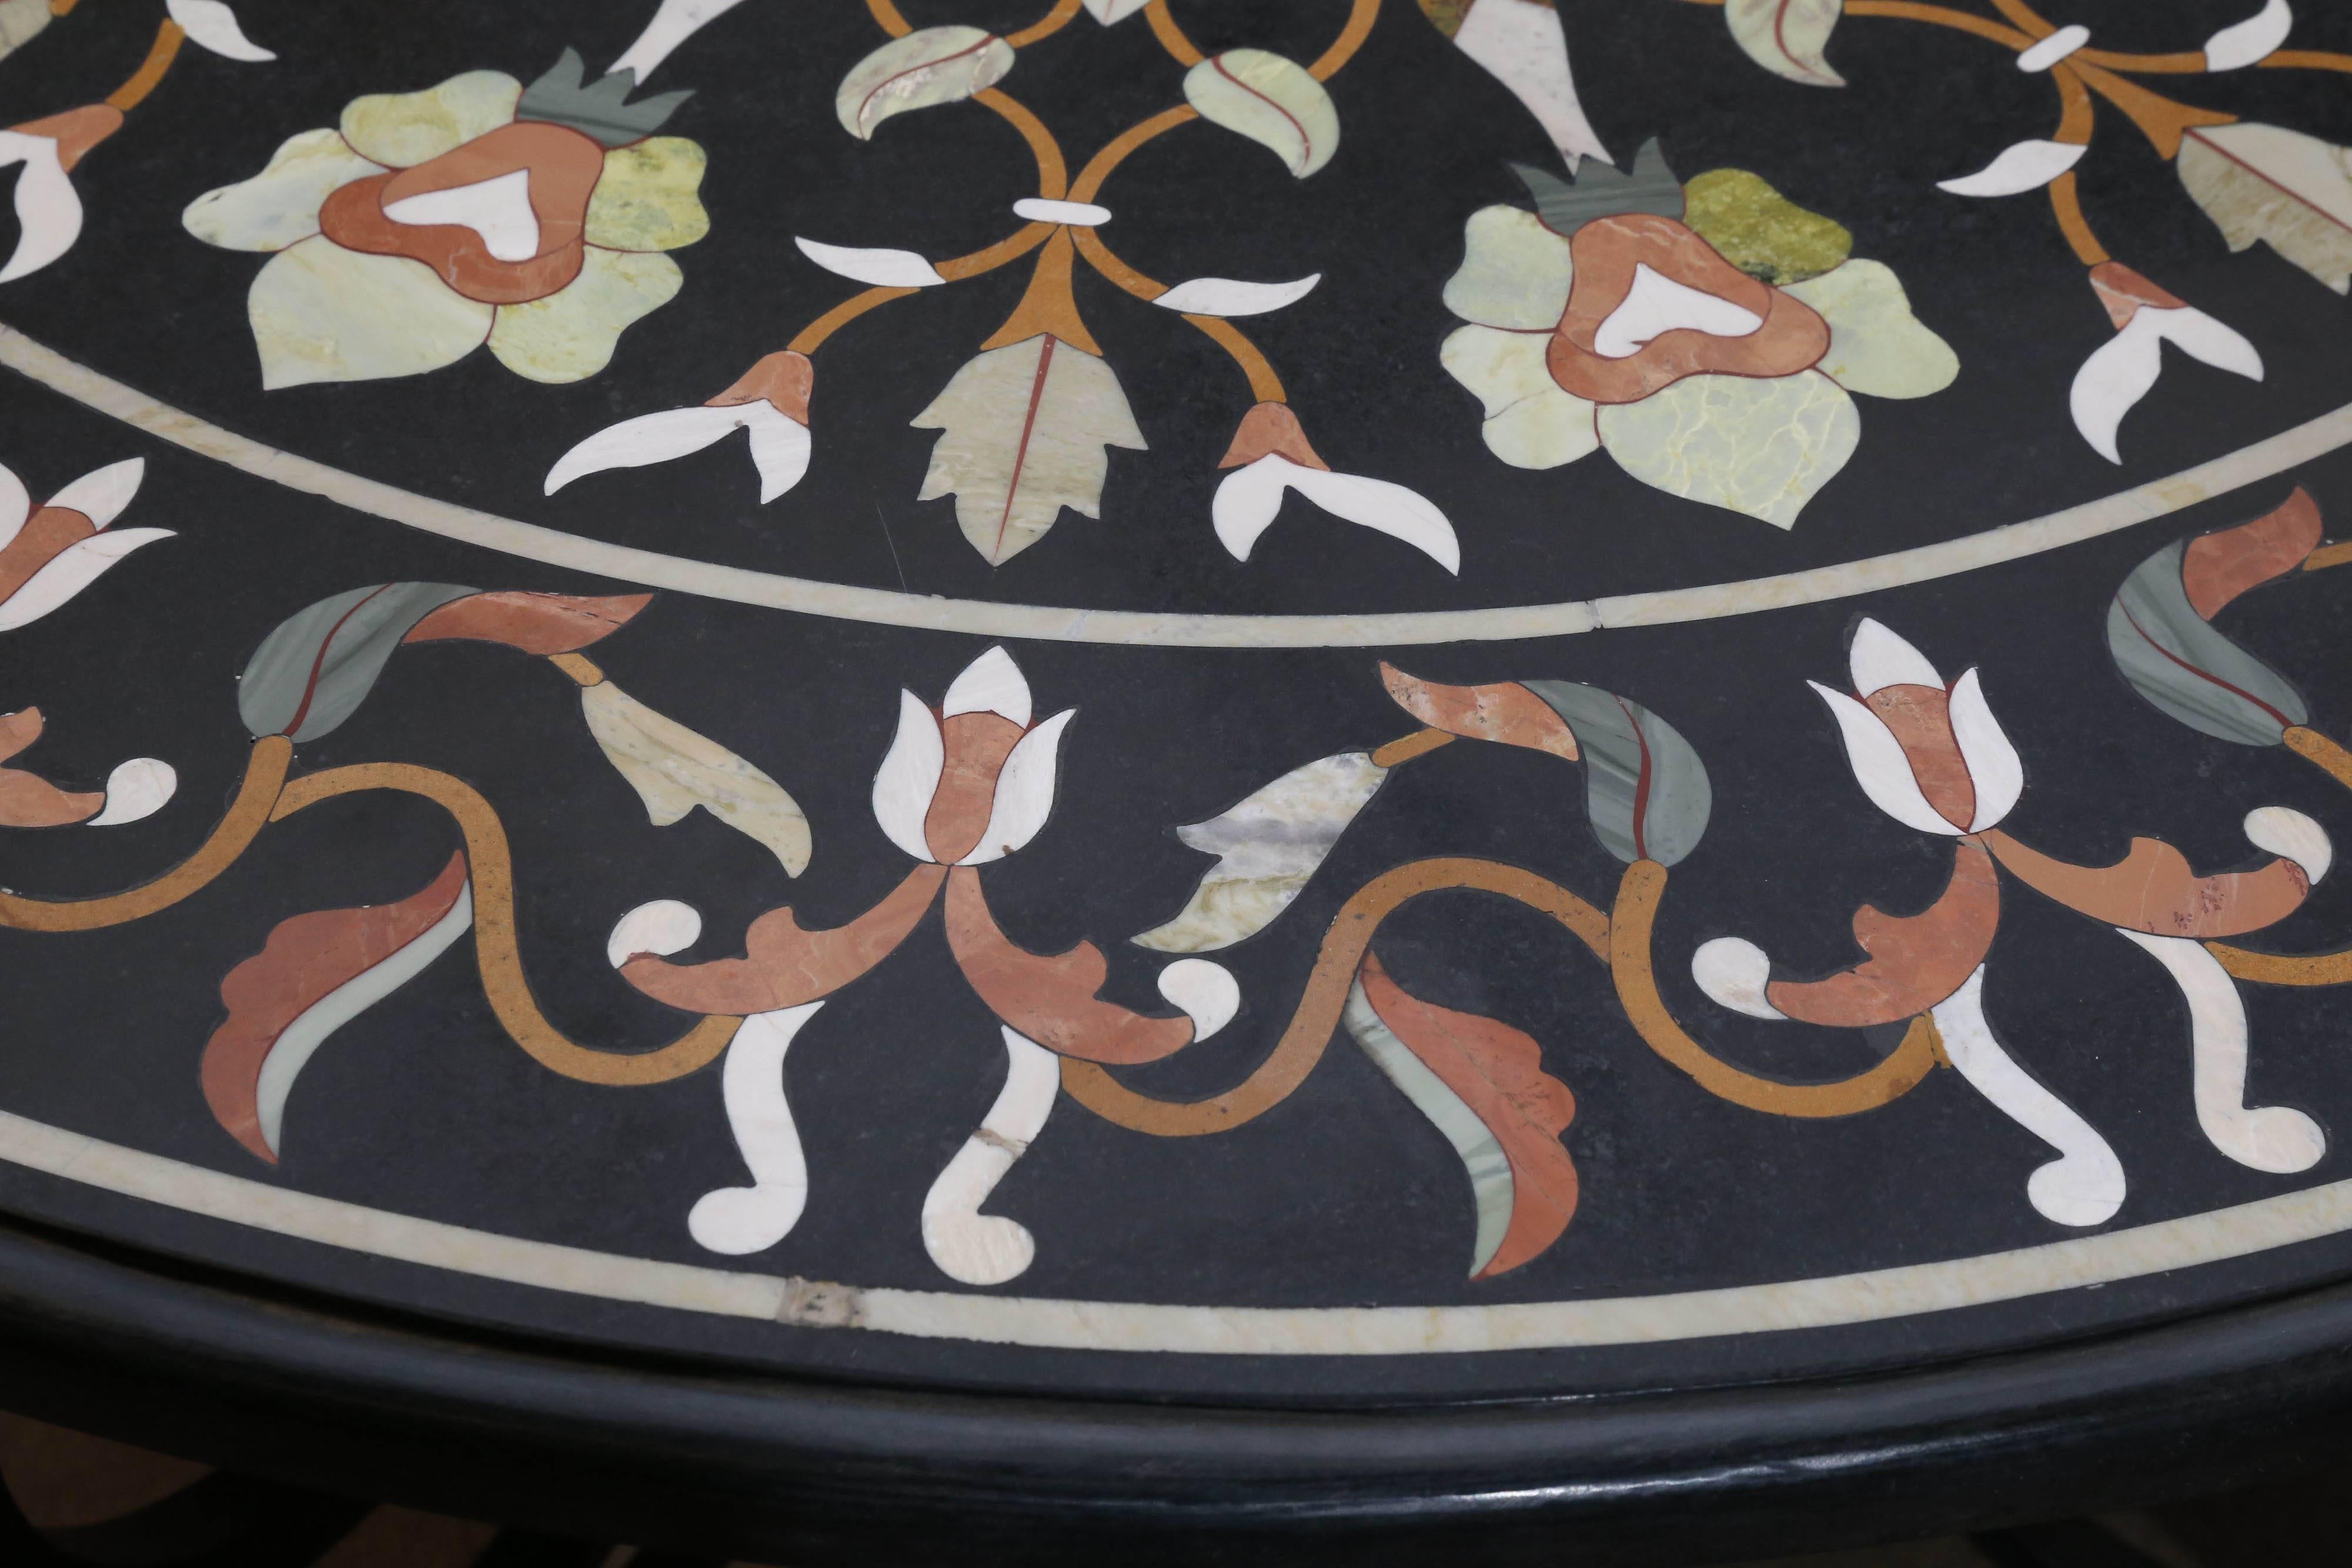 Indian Midcentury Pietra-Dura Round Center Table with Solid Wrought Iron Support